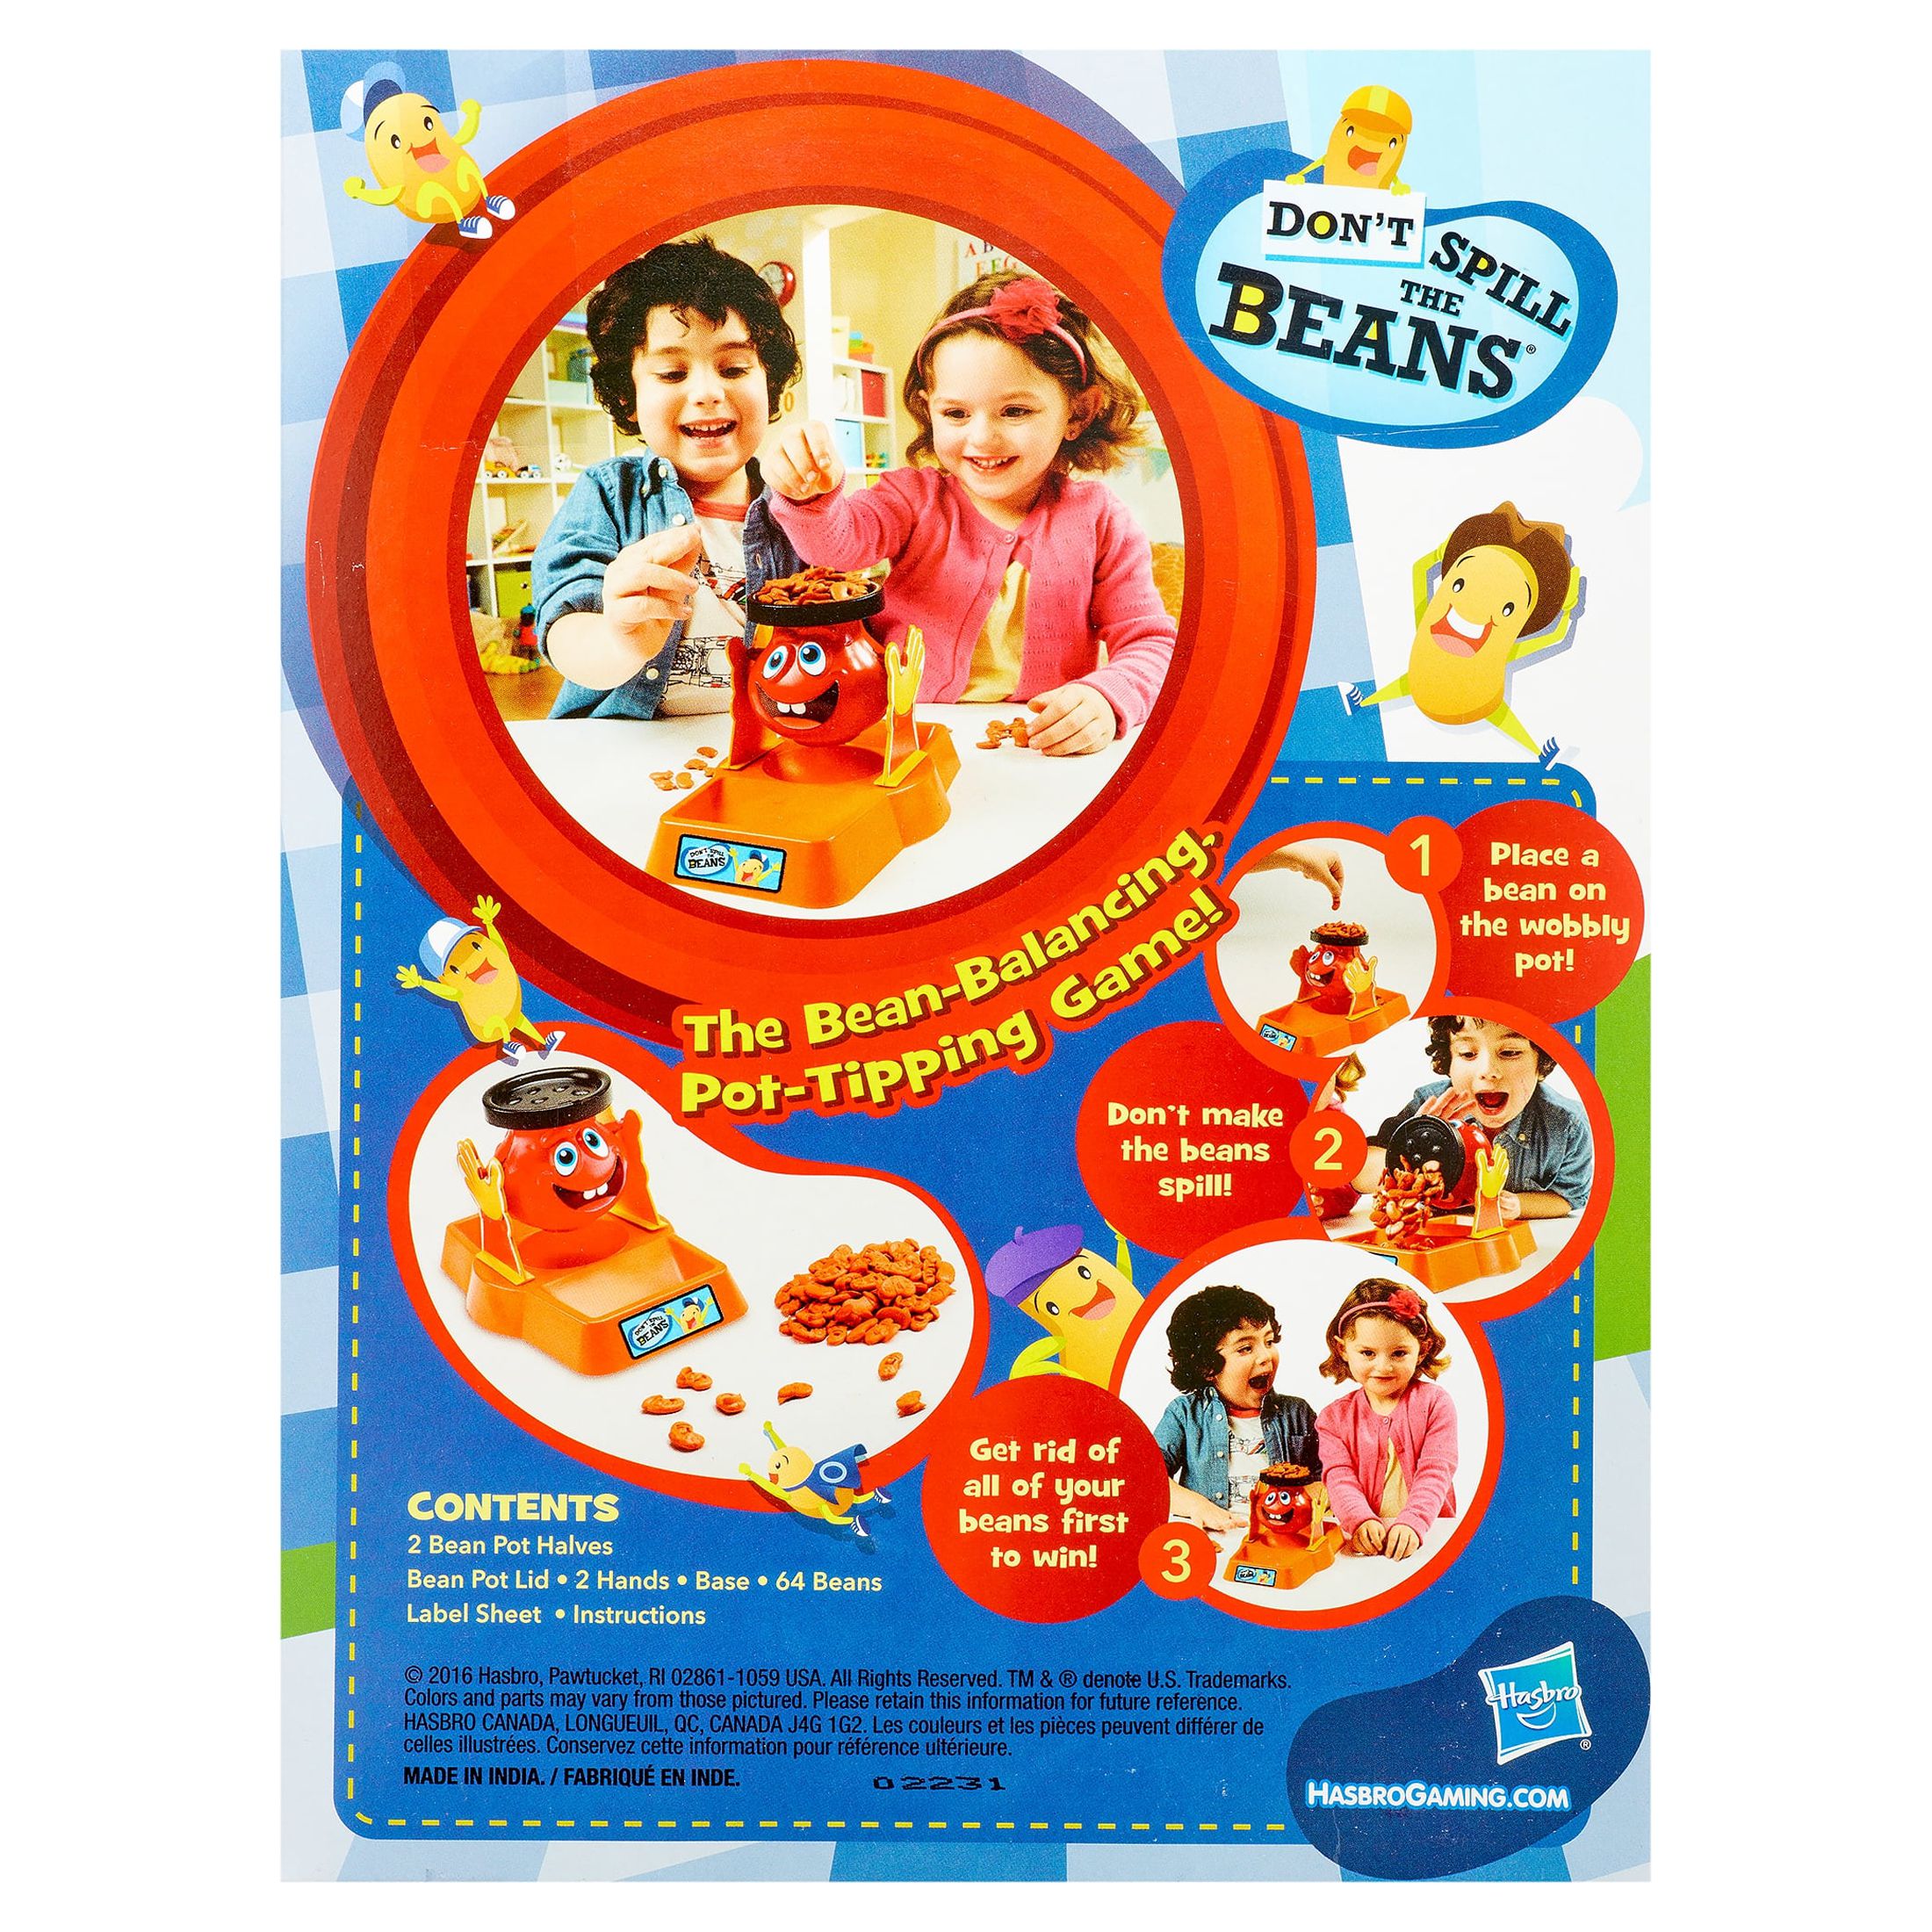 Don't Spill the Beans Classic Board Game for Kids and Family Ages 3 and Up, 2 Players - image 5 of 11